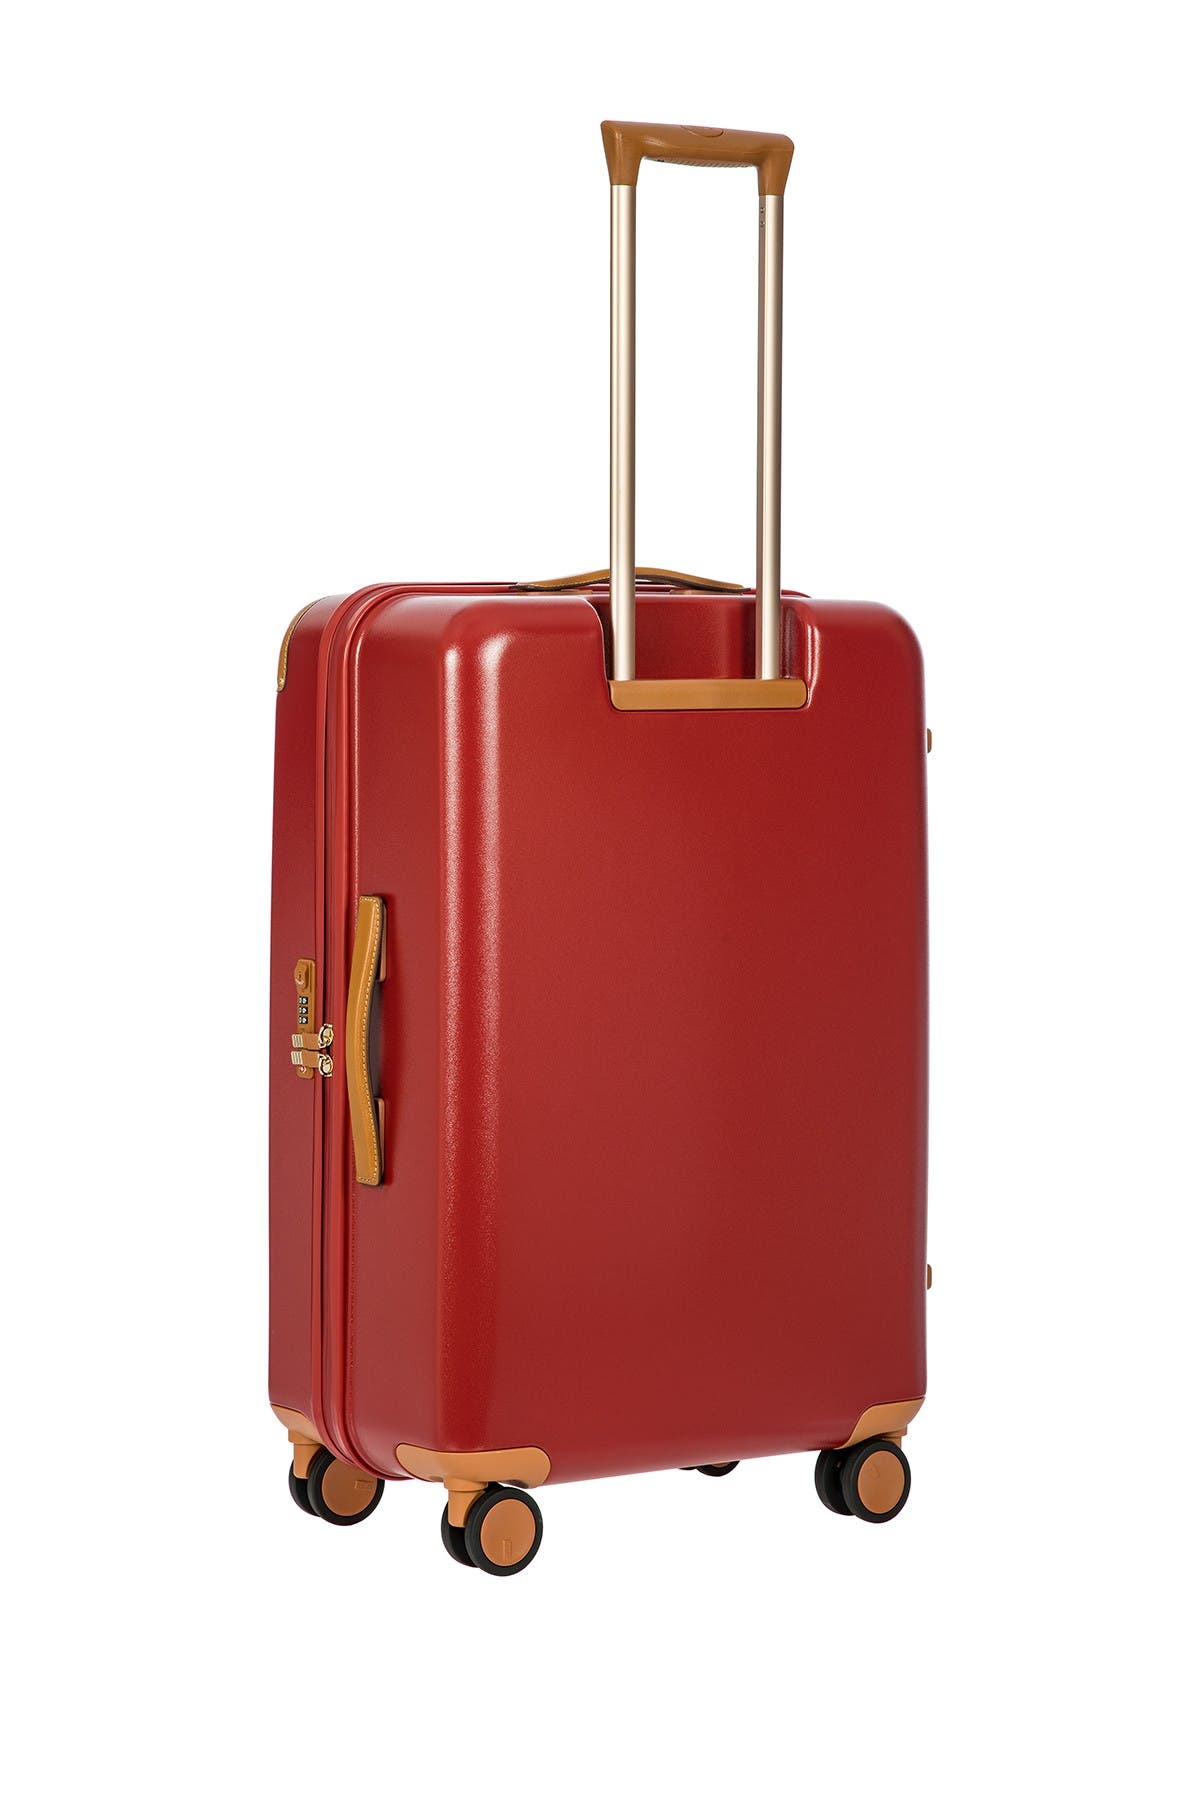 Bric's Luggage Amalfi 27" Spinner Suitcase In Bright Red2